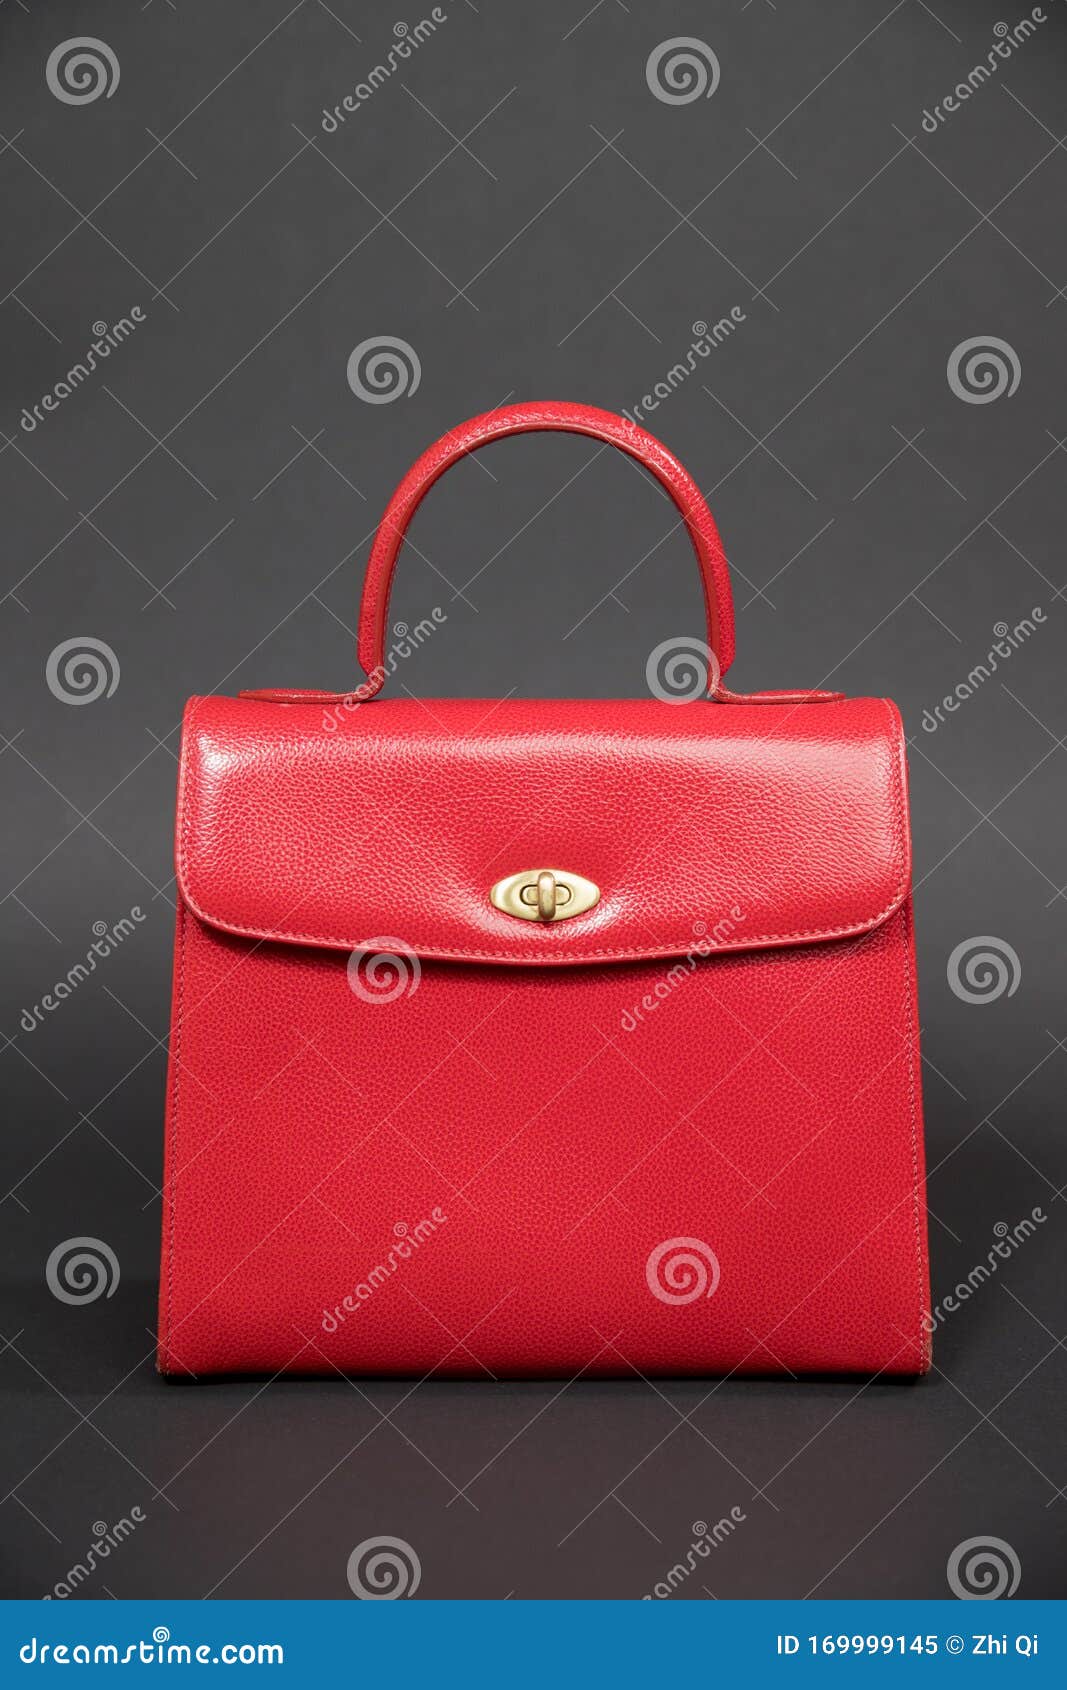 Vintage Red Women`s Handbag Stock Image - Image of glamour, accessory ...